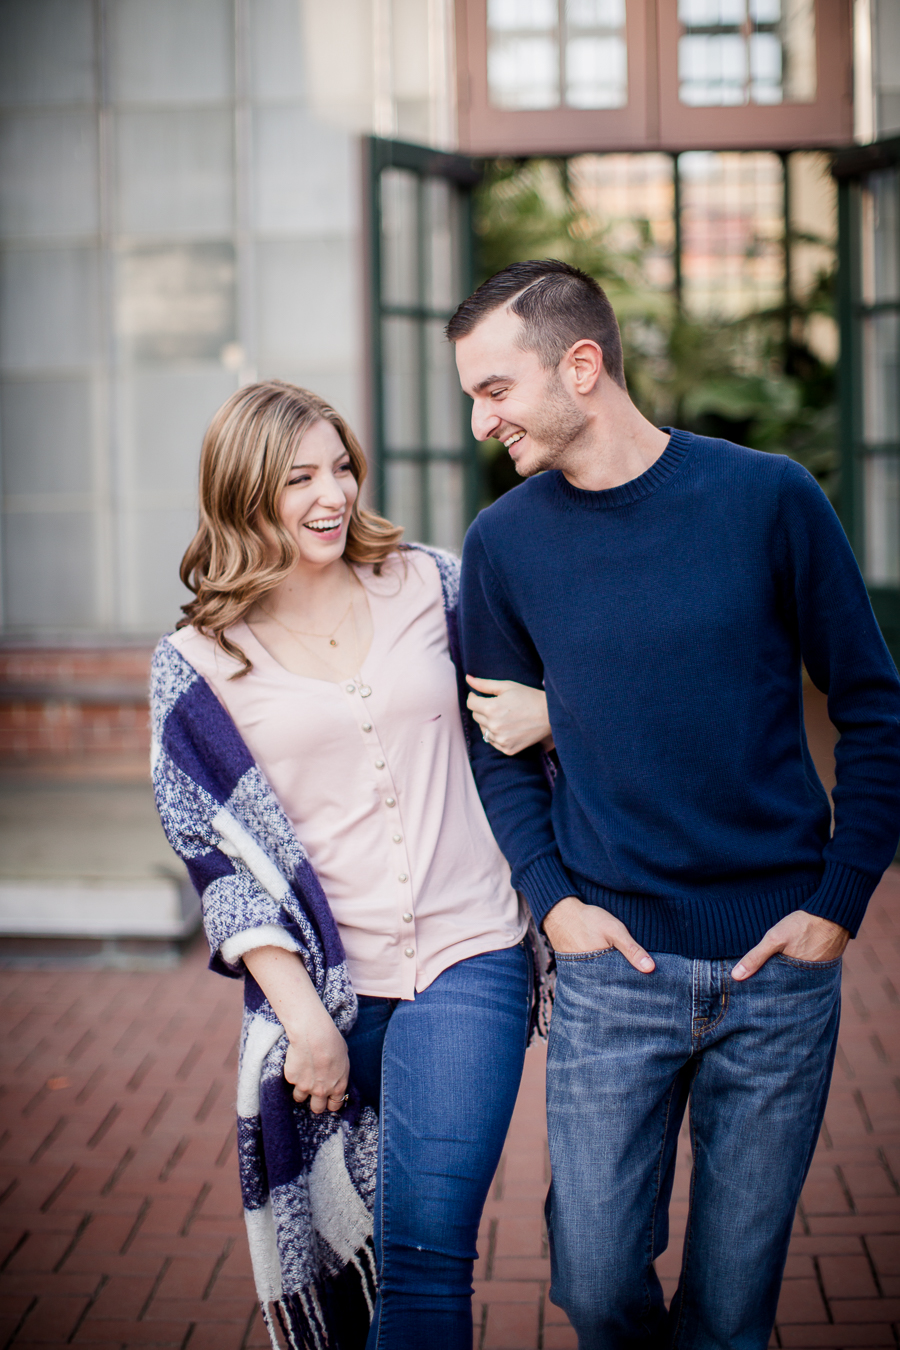 Hips together engagement photo by Knoxville Wedding Photographer, Amanda May Photos.